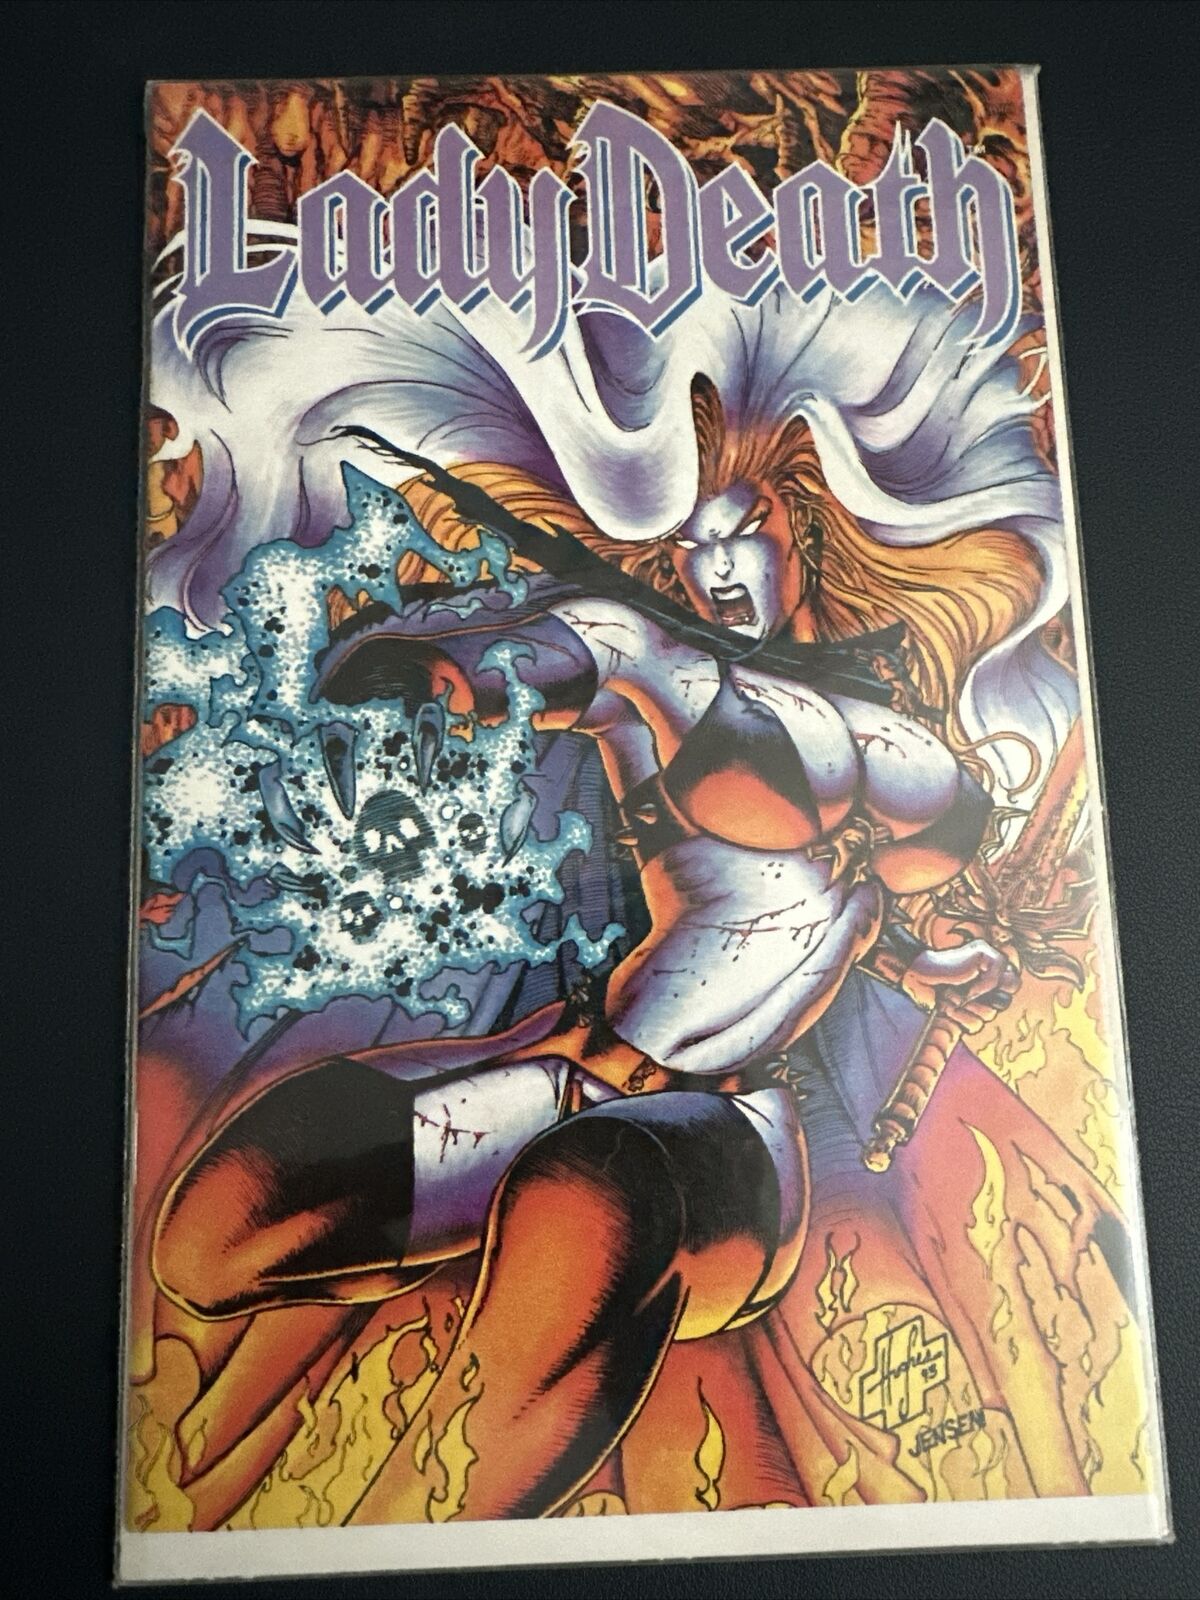 1994 Lady Death Series #3 by Chaos Comics 1st Printing 1994 NM Steven Hughes